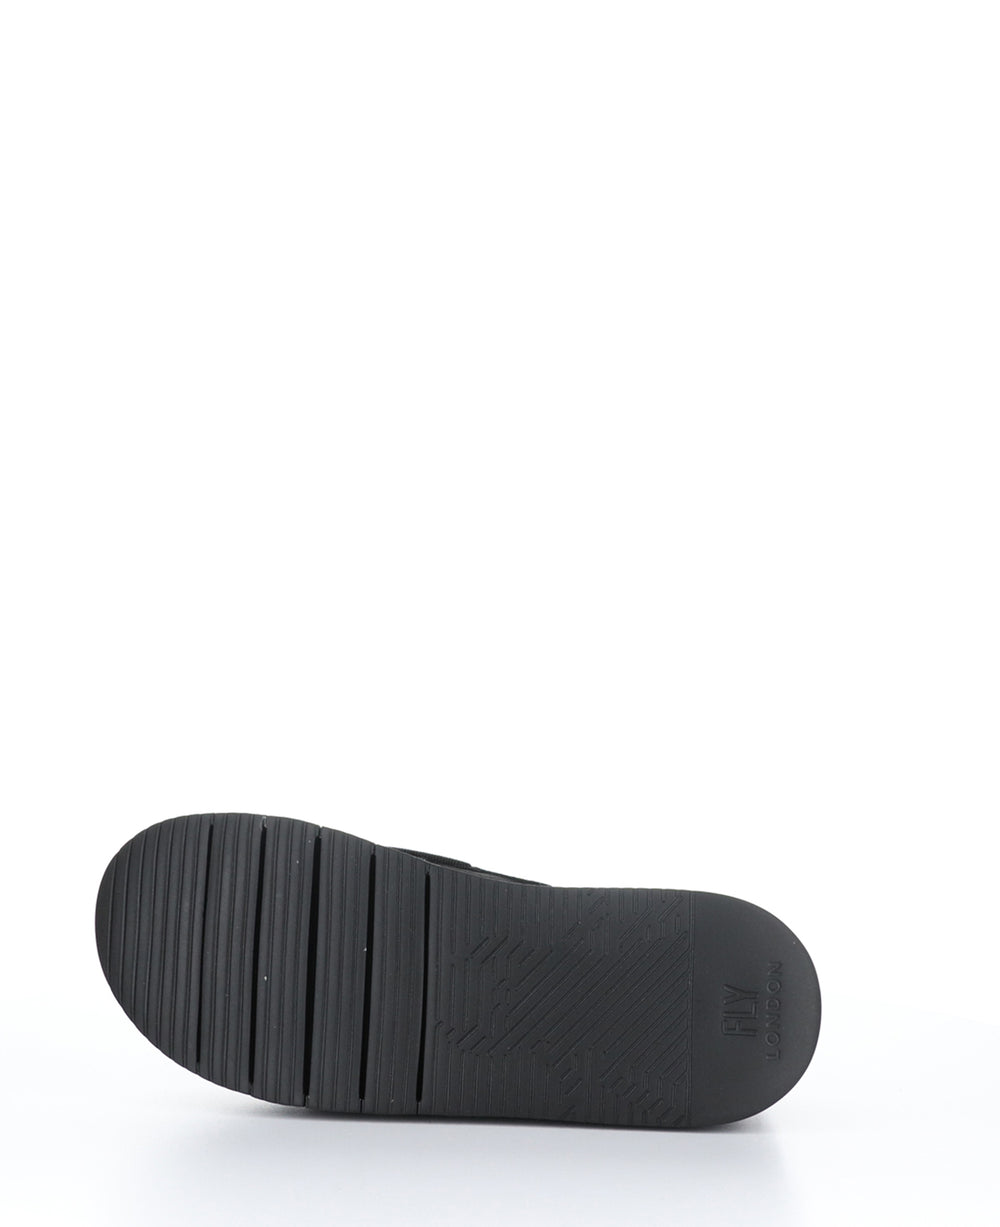 CEZE361FLY BLACK Round Toe Clogs|CEZE361FLY Chaussures à Bout Rond in Noir